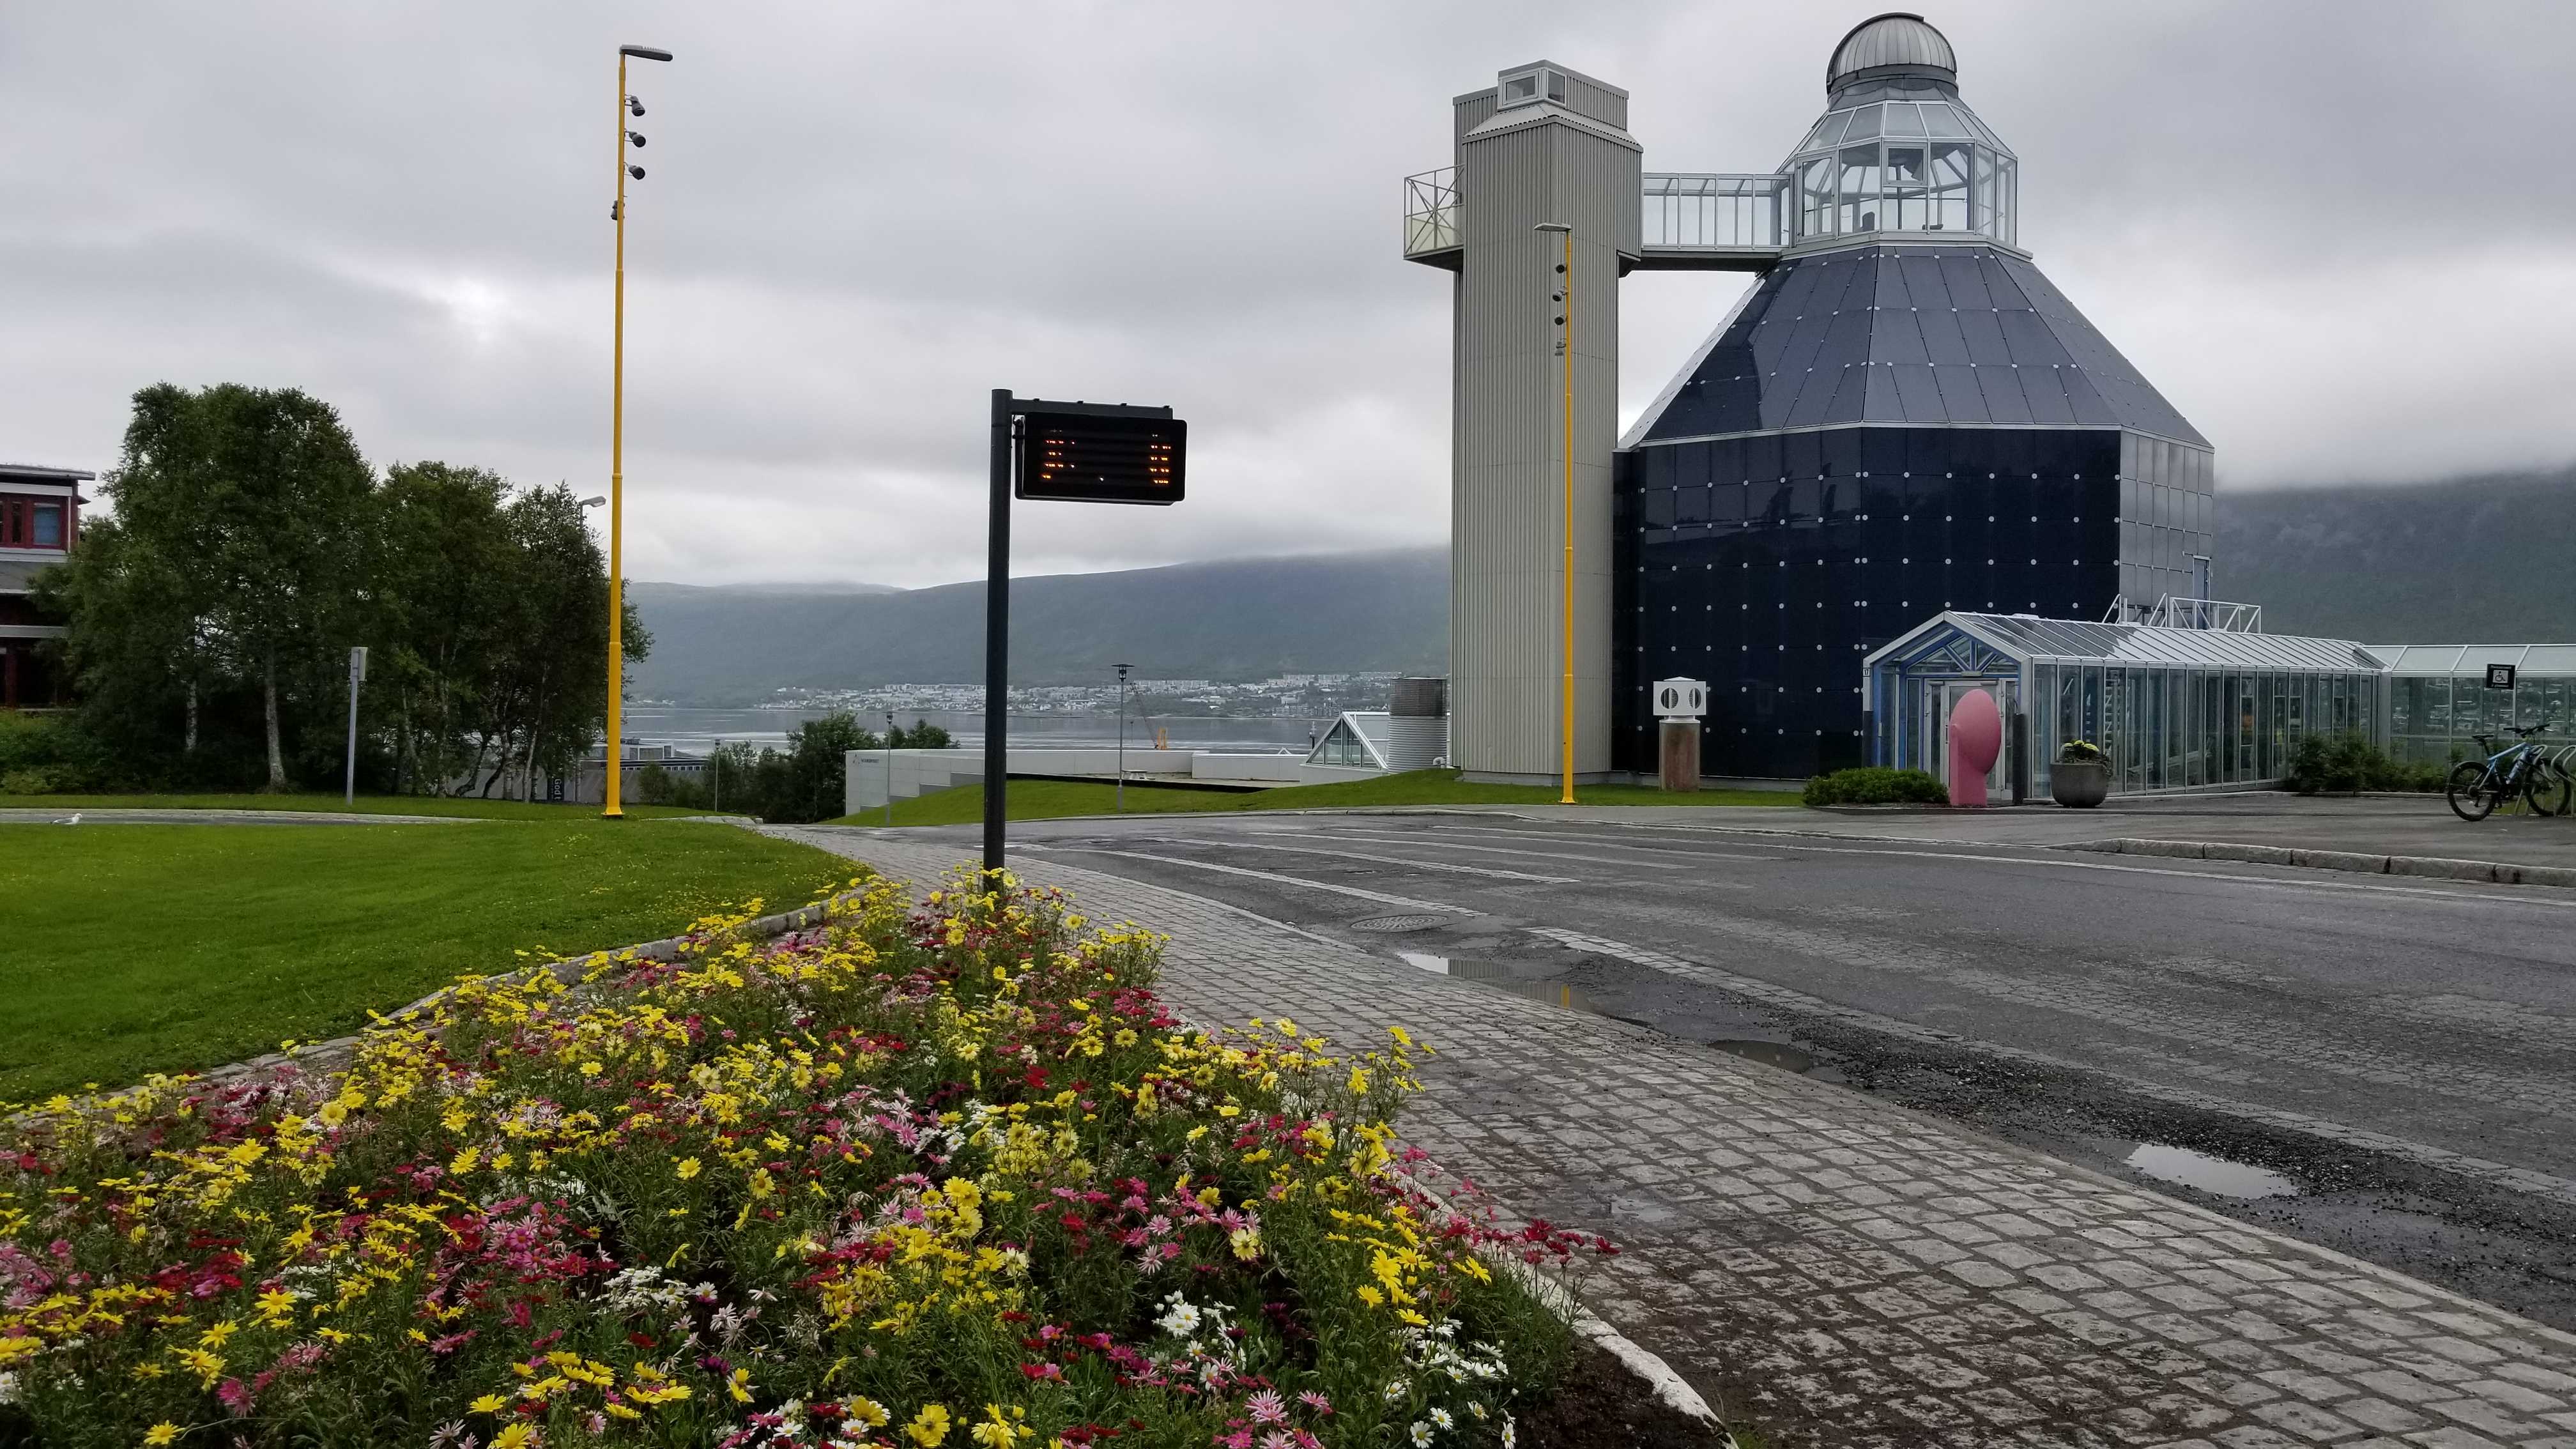 View of the planetarium, mountains, and harbor from the bus stop.